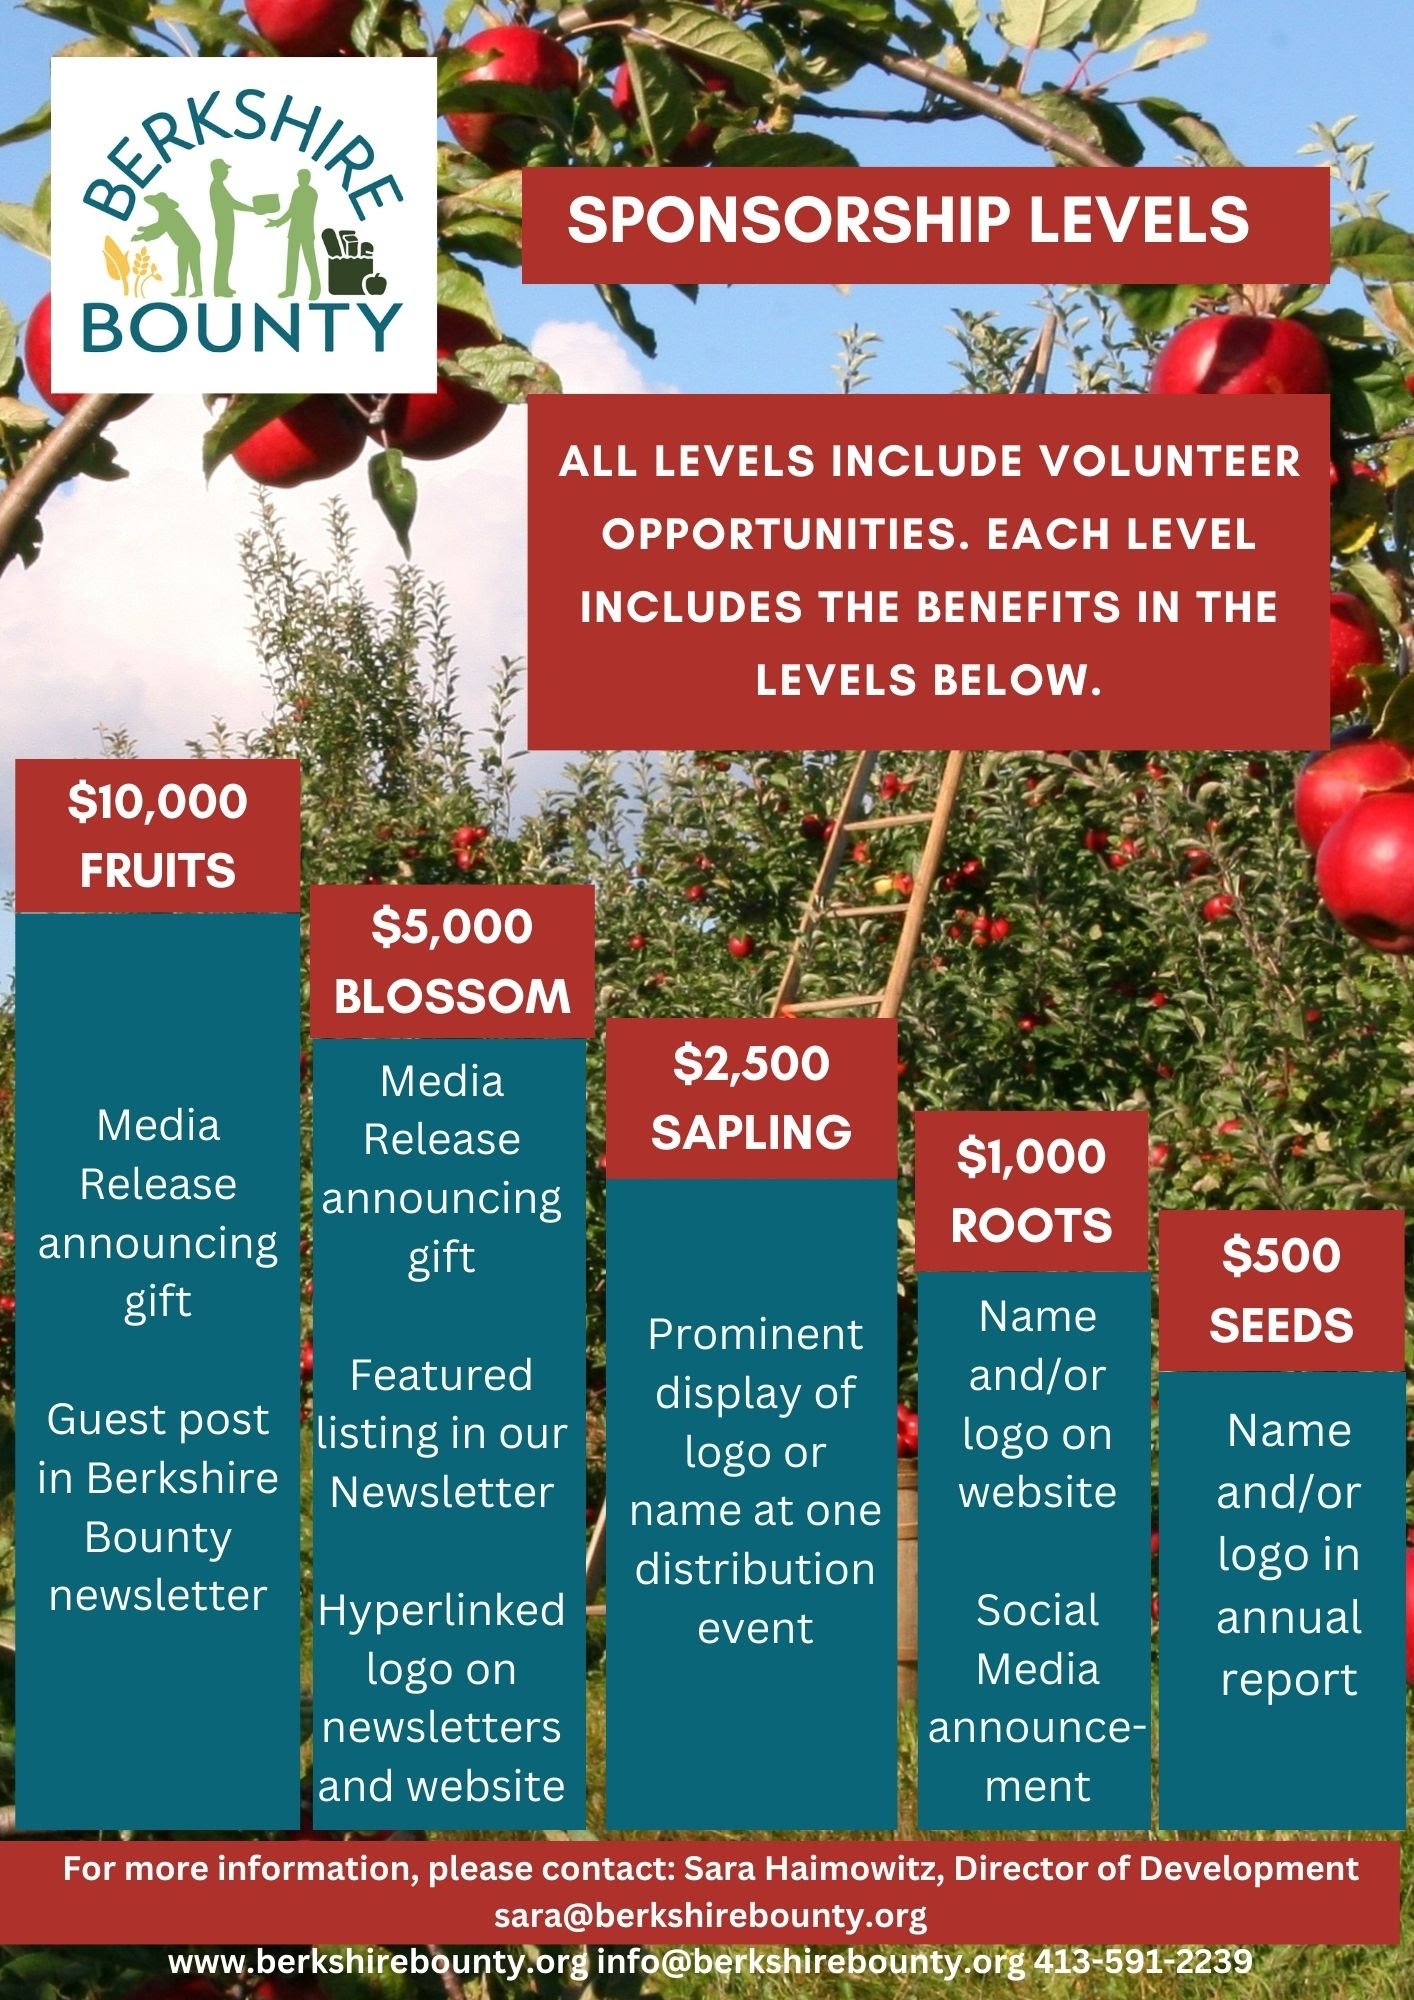 Become a Berkshire Bounty sponsor today!

Are you a business owner that cares about Food Security in your neighborhood? Berkshire Bounty is establishing a sponsorship program as a way for local businesses to be part of the solution for alleviating fo